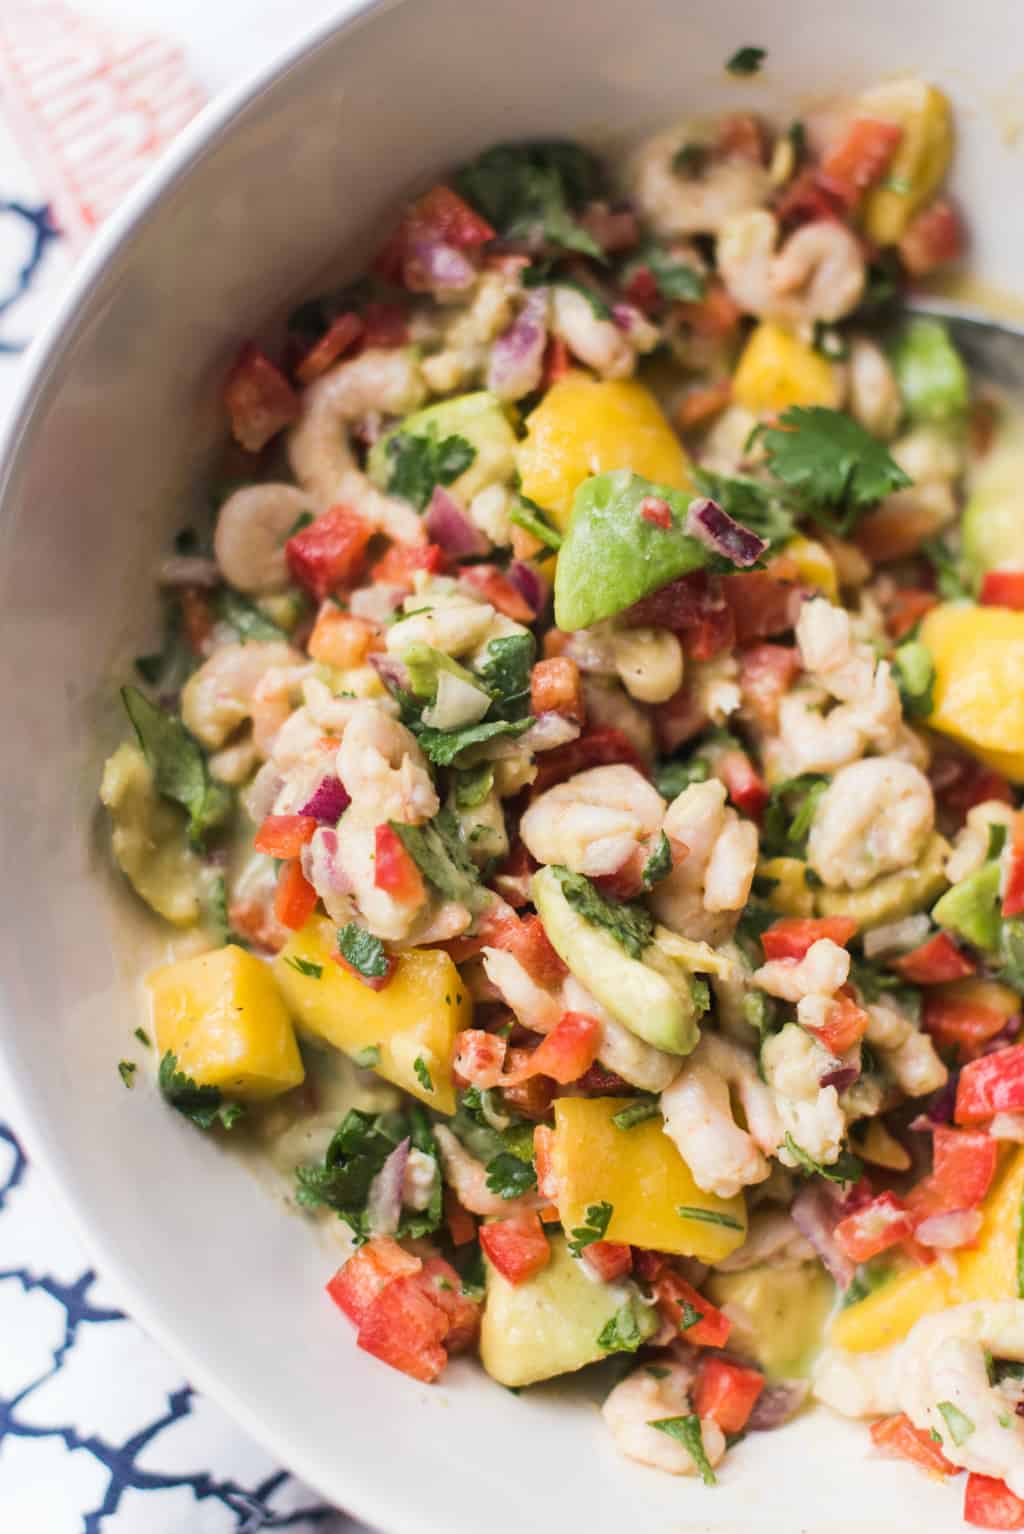 Shrimp Ceviche Recipe With Mango and Avocado - Reluctant Entertainer